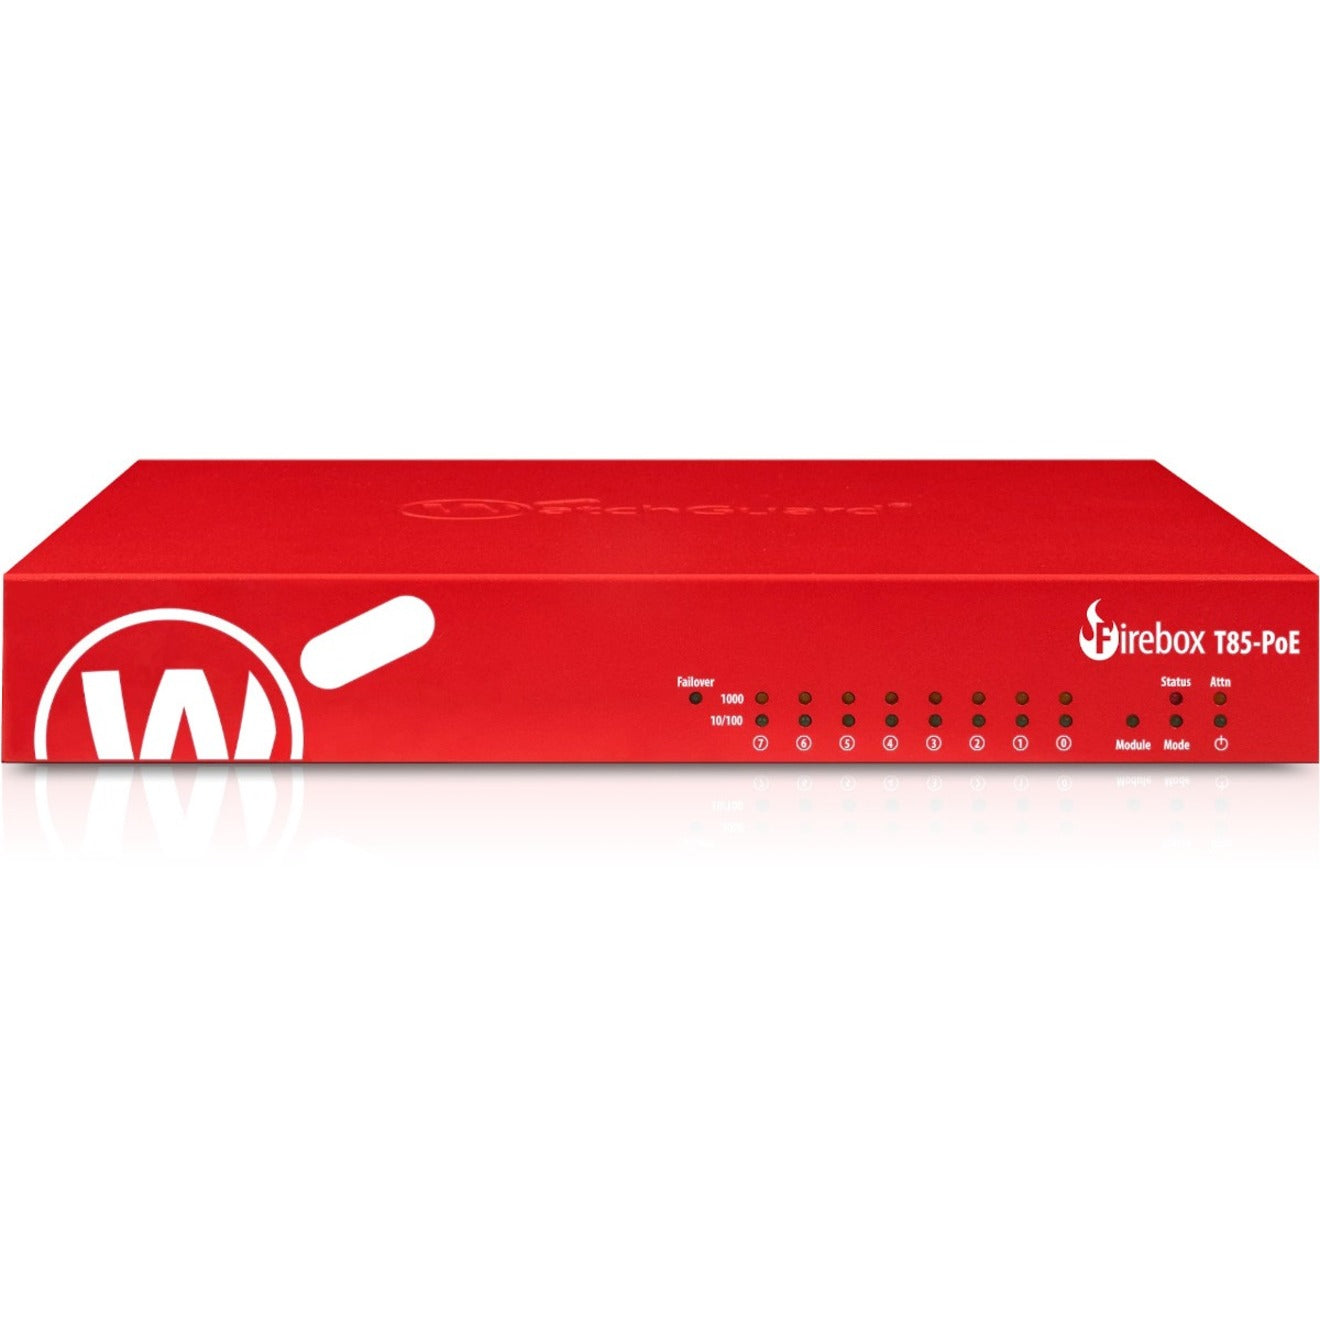 WatchGuard WGT85413-US Firebox T85-PoE Network Security/Firewall Appliance, 8 Ports, 3 Year Basic Security Suite